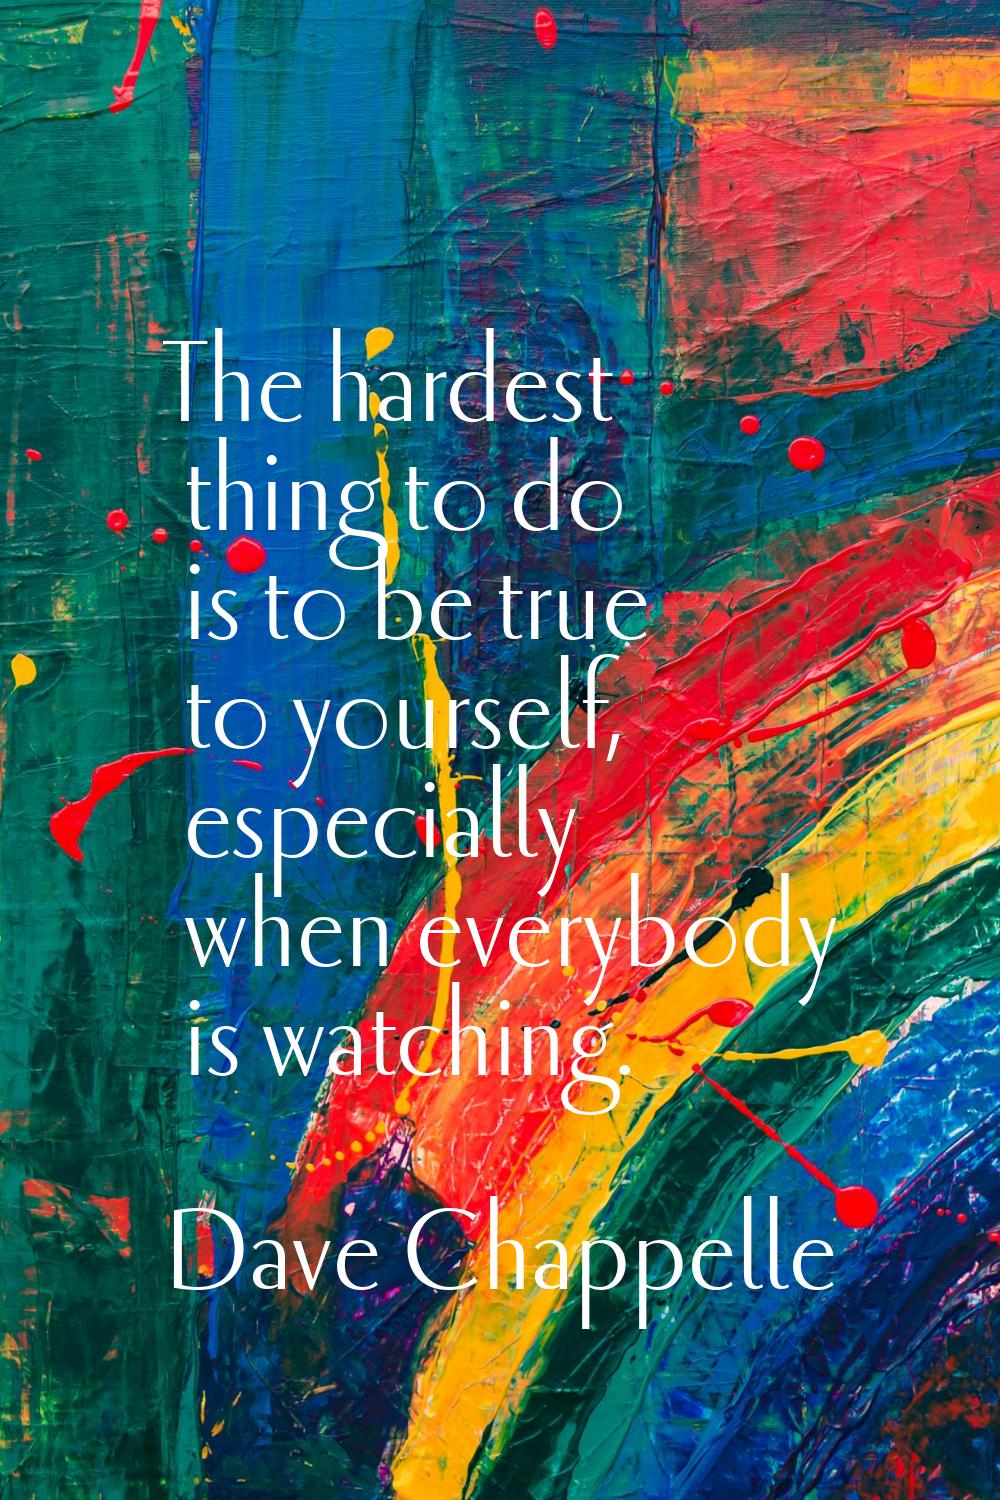 The hardest thing to do is to be true to yourself, especially when everybody is watching.